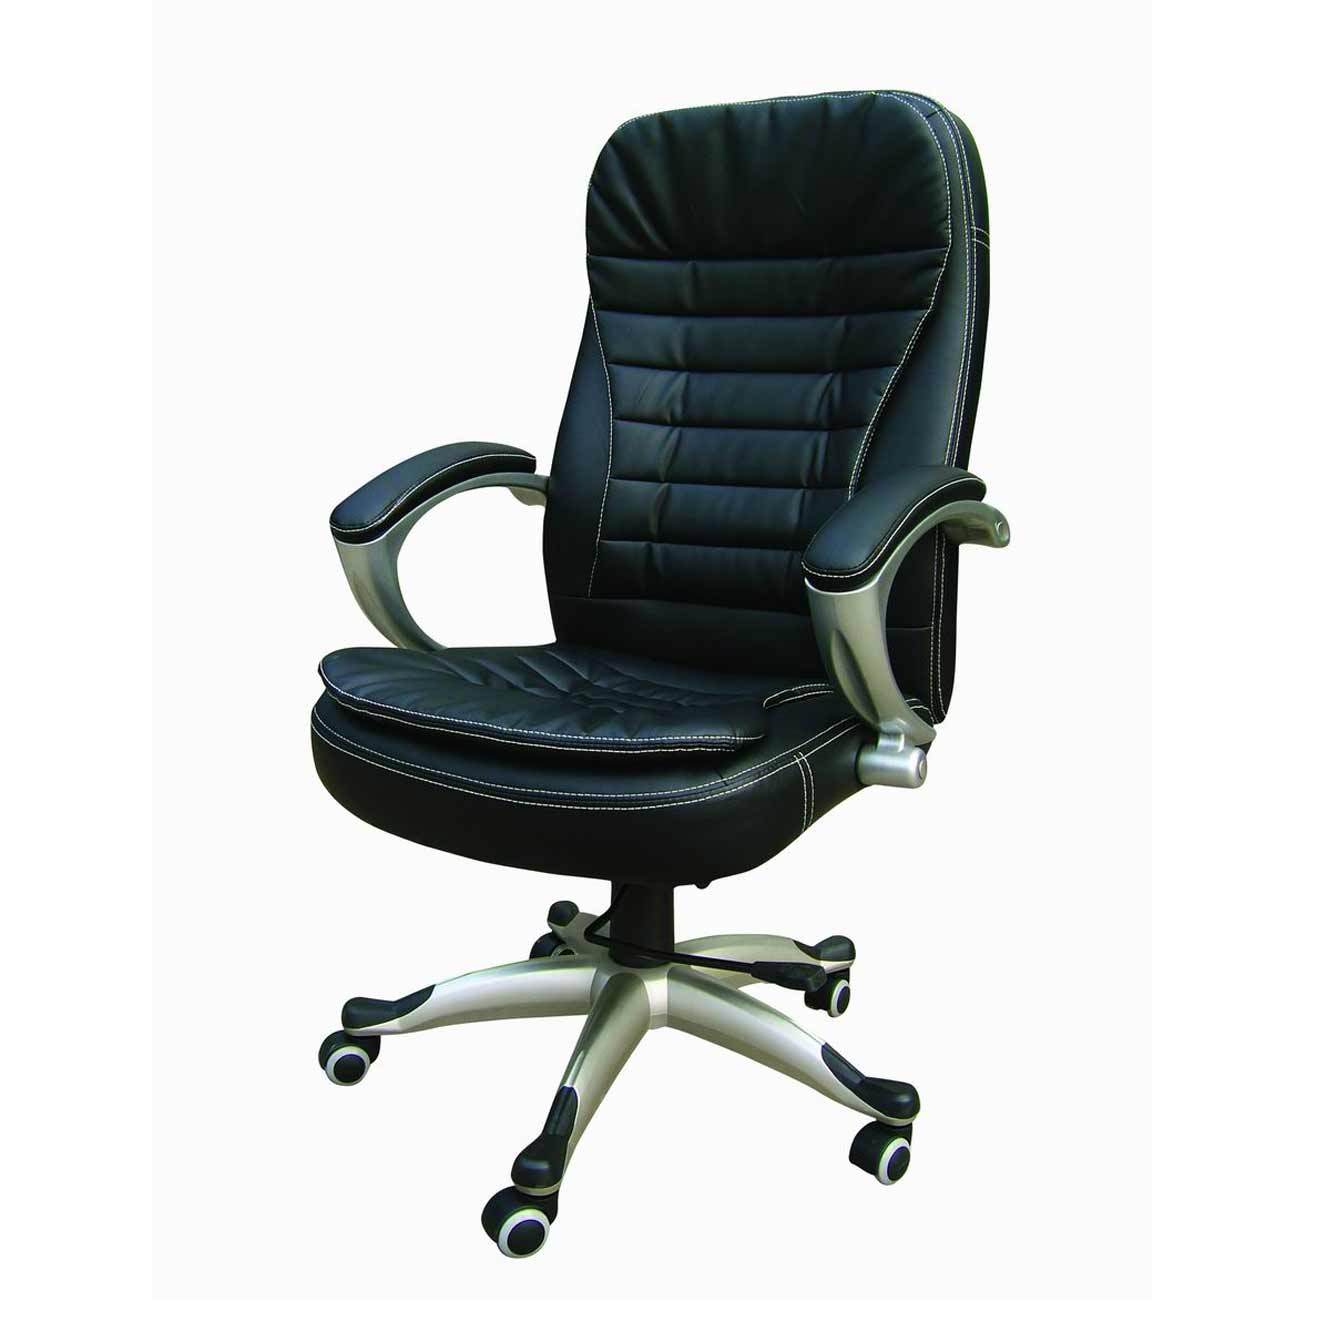 lumbar support for chair